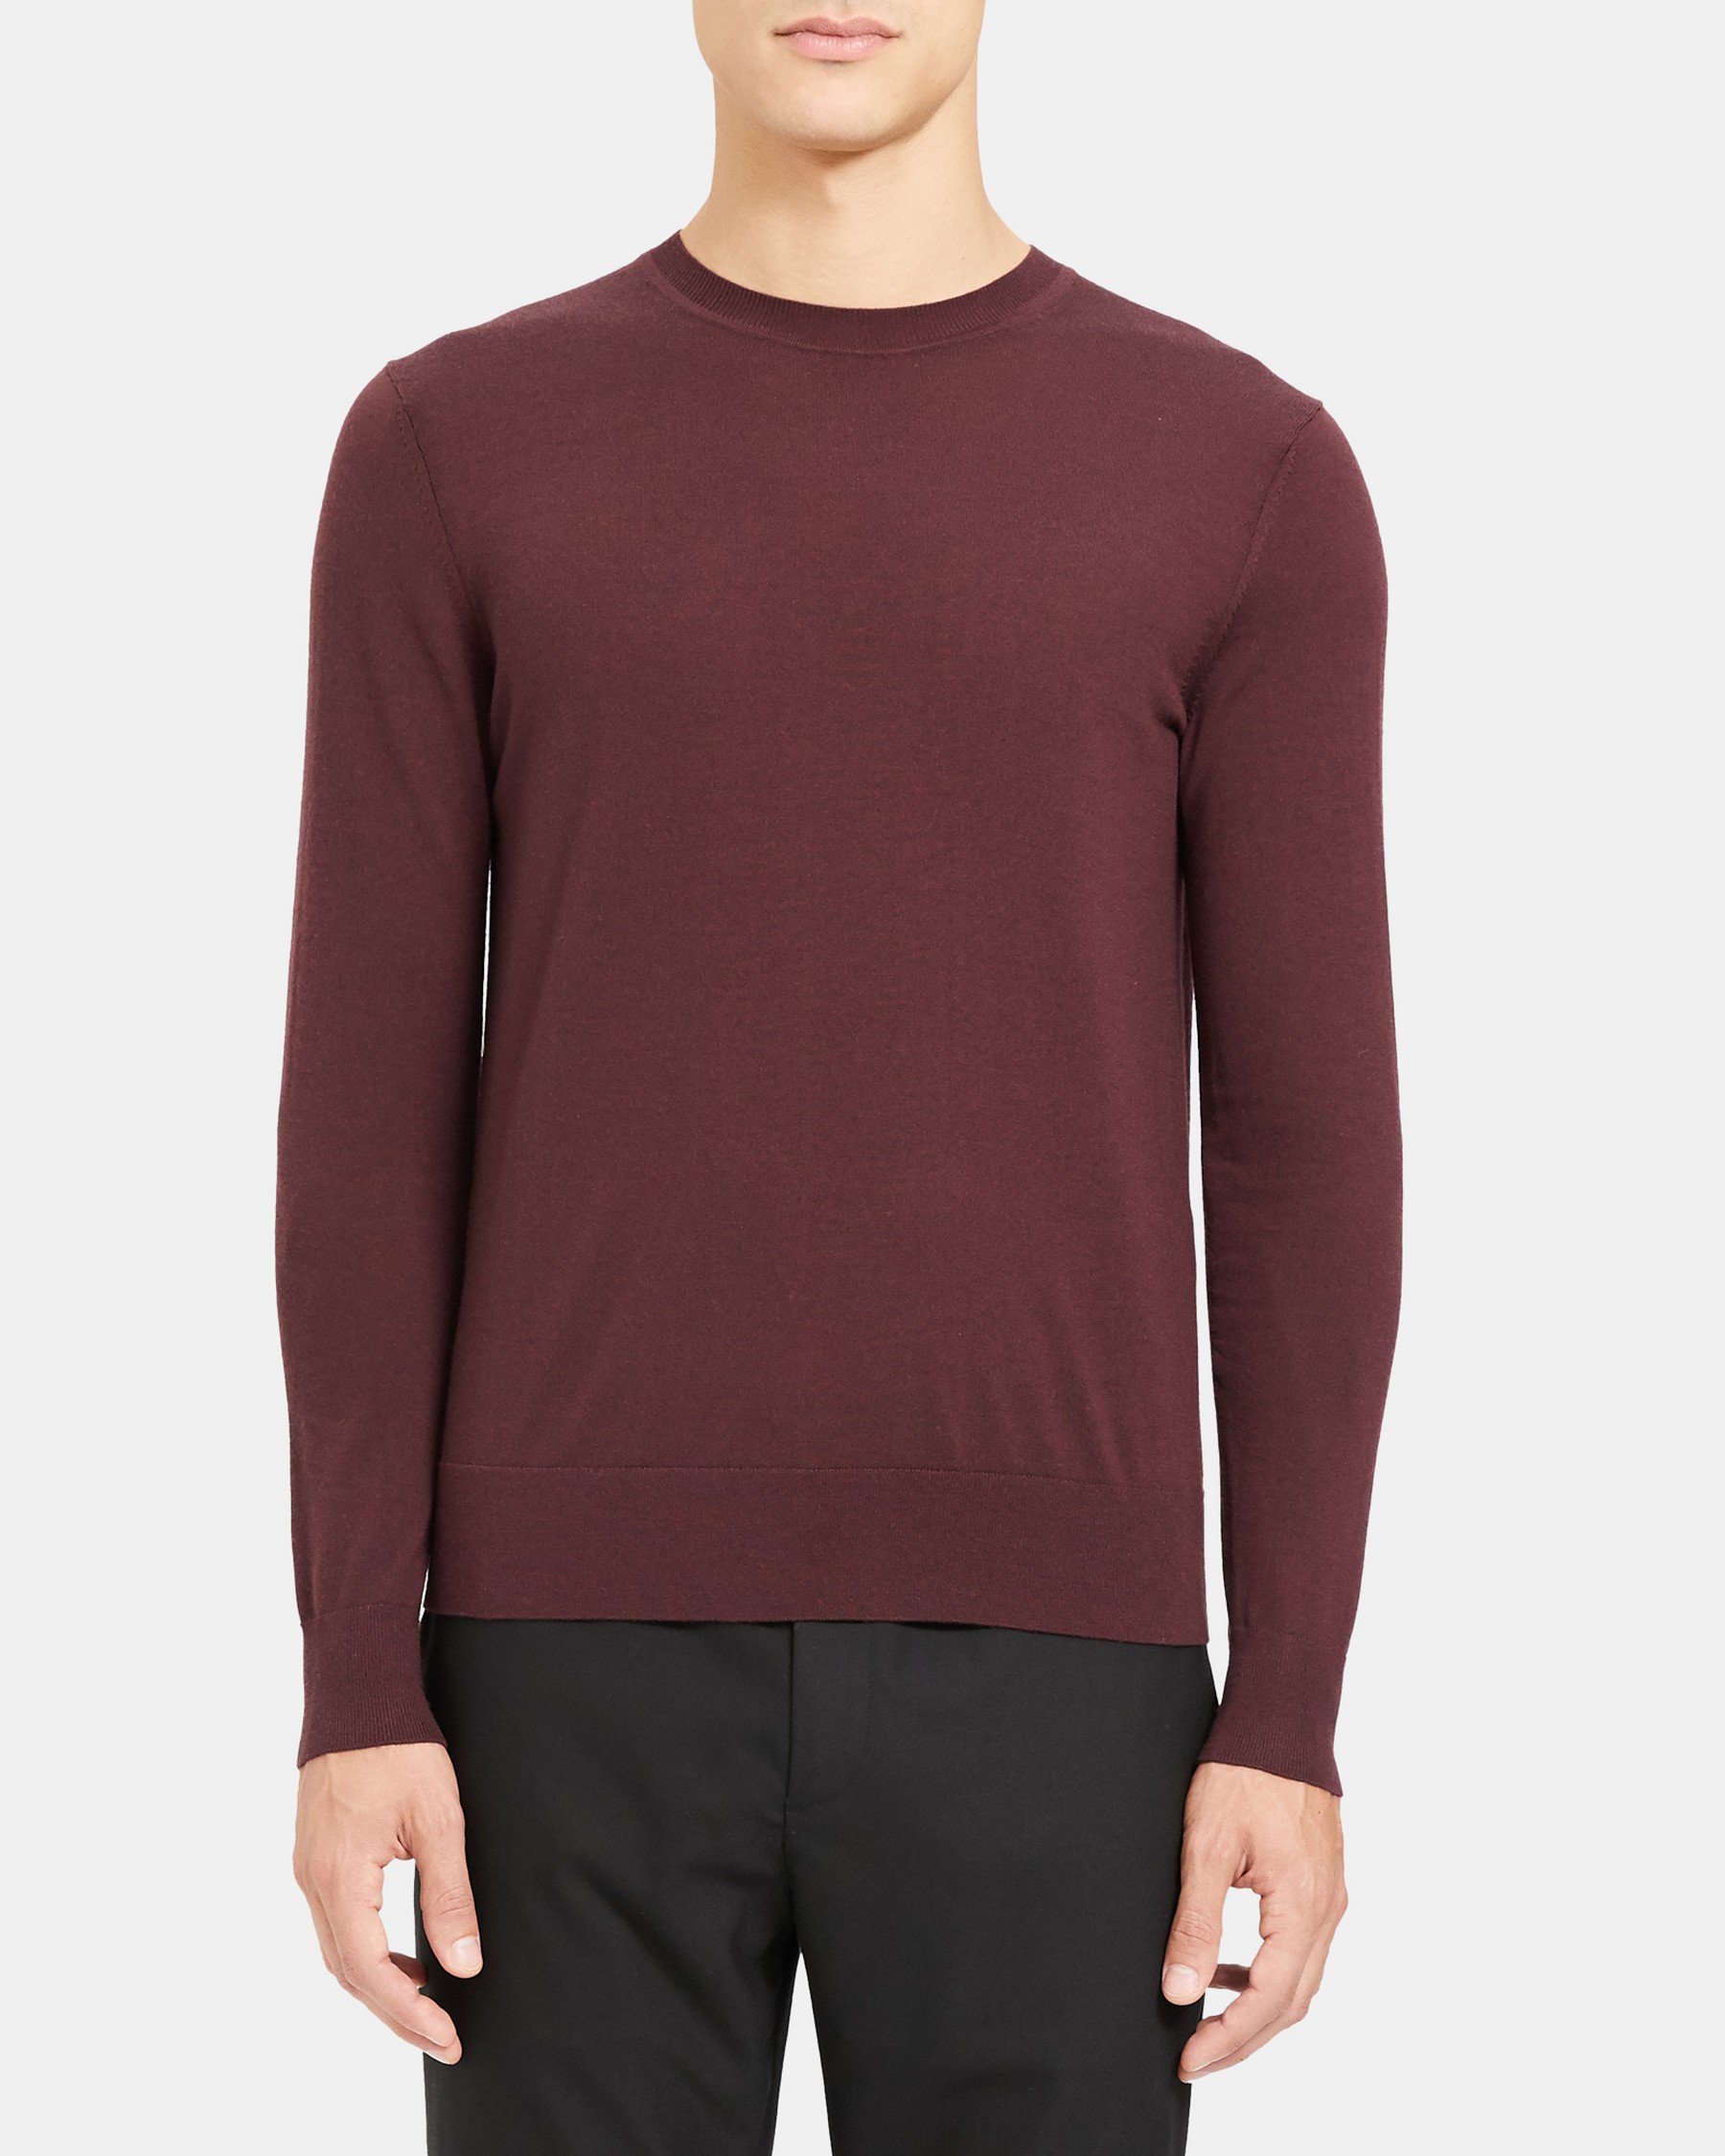 CREW NECK PO | Theory Outlet